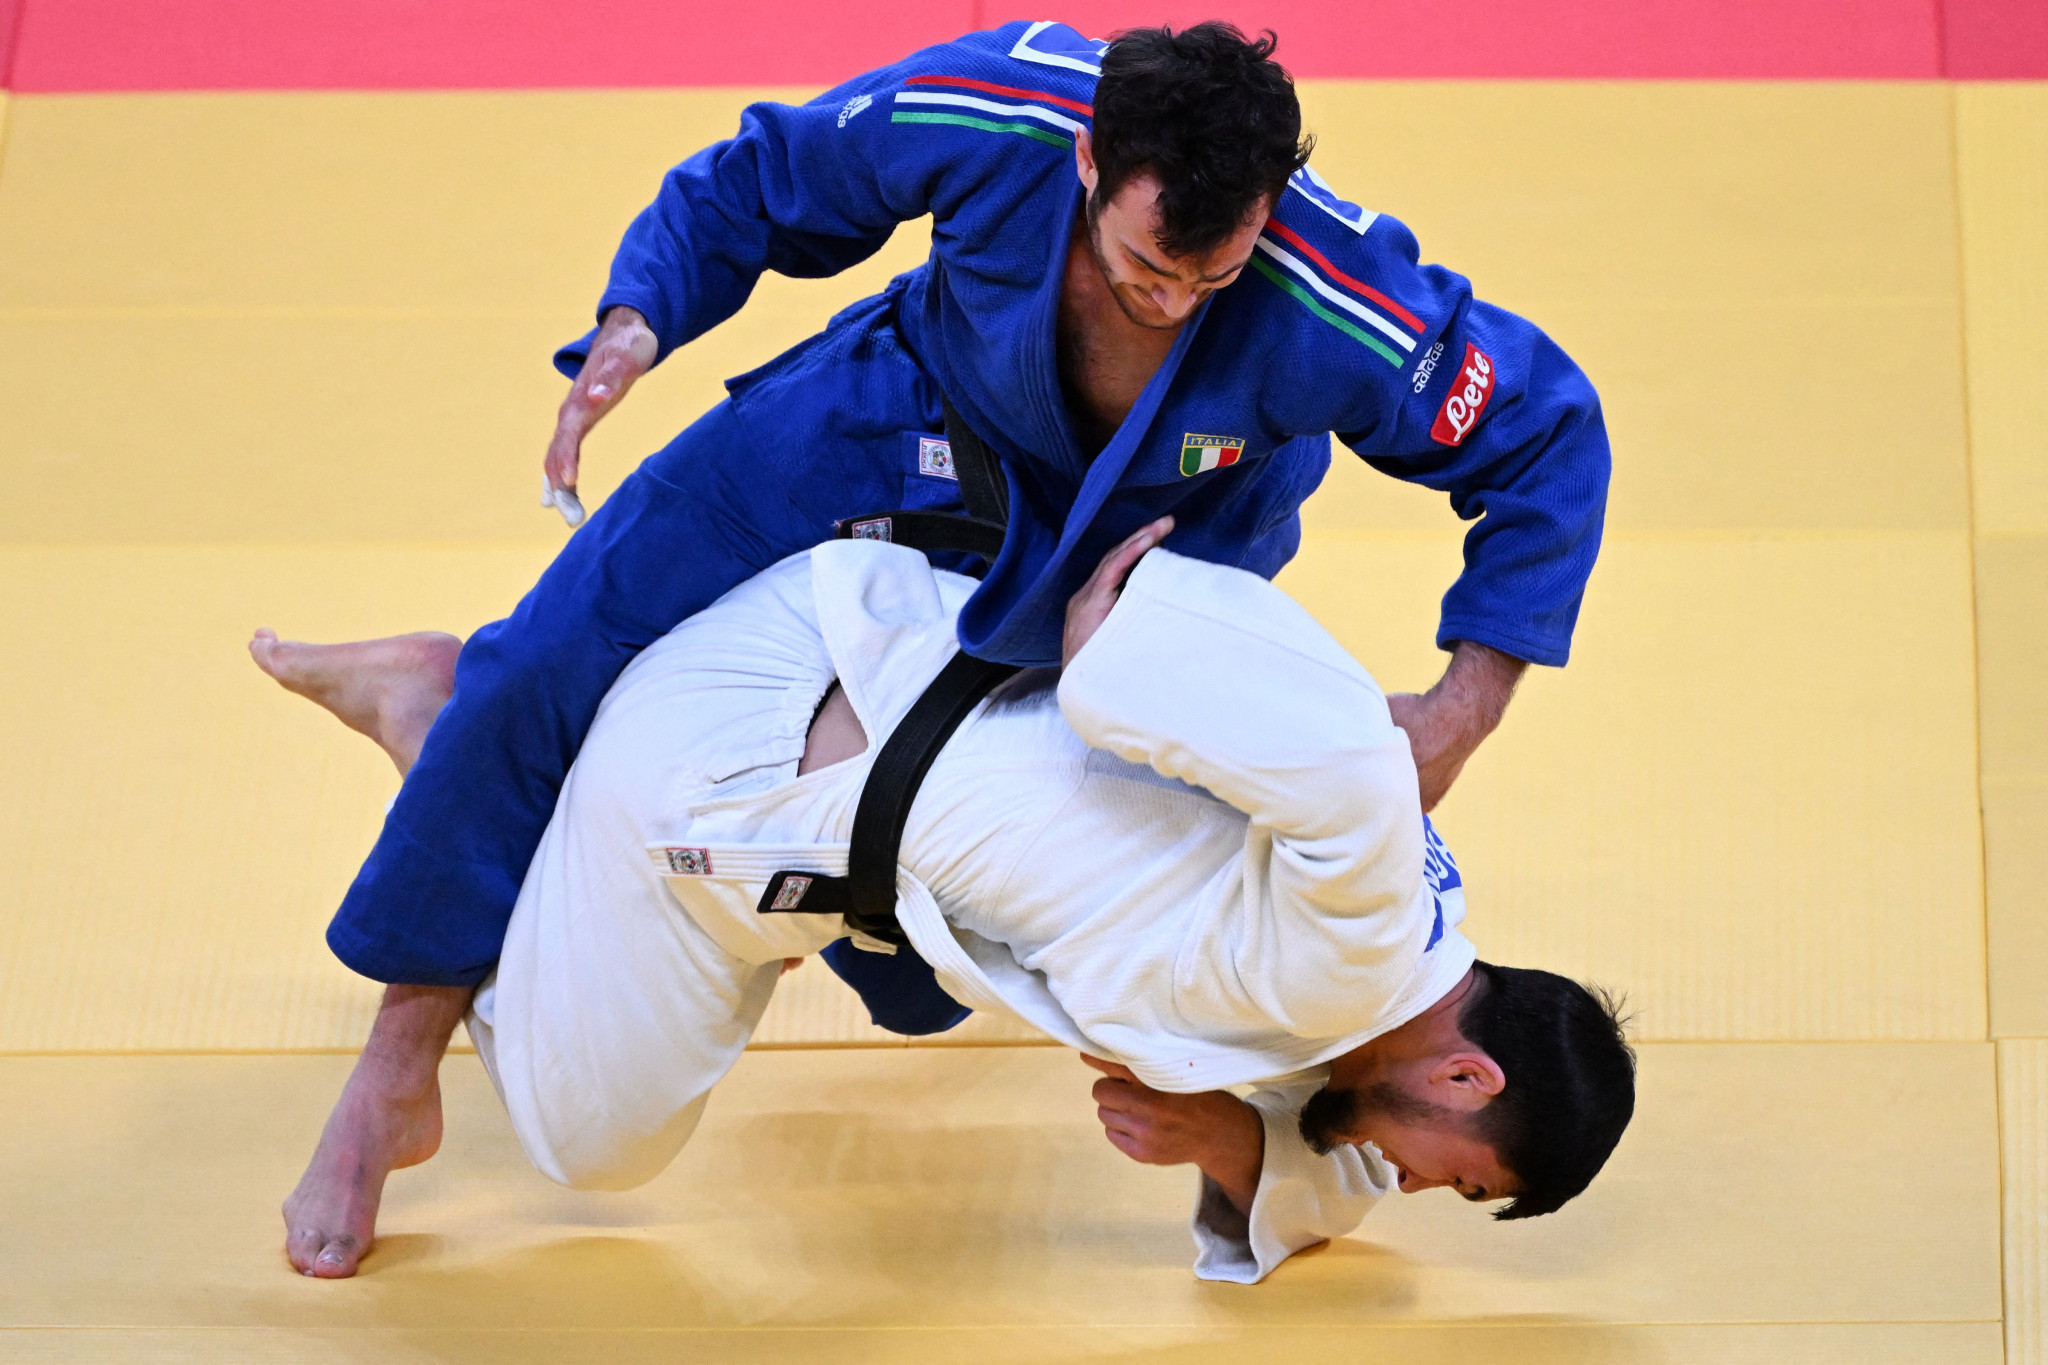 Christian Parlati, in blue, of Italy was his victim as he lost to a hansoku-make in the golden score round ©Getty Images